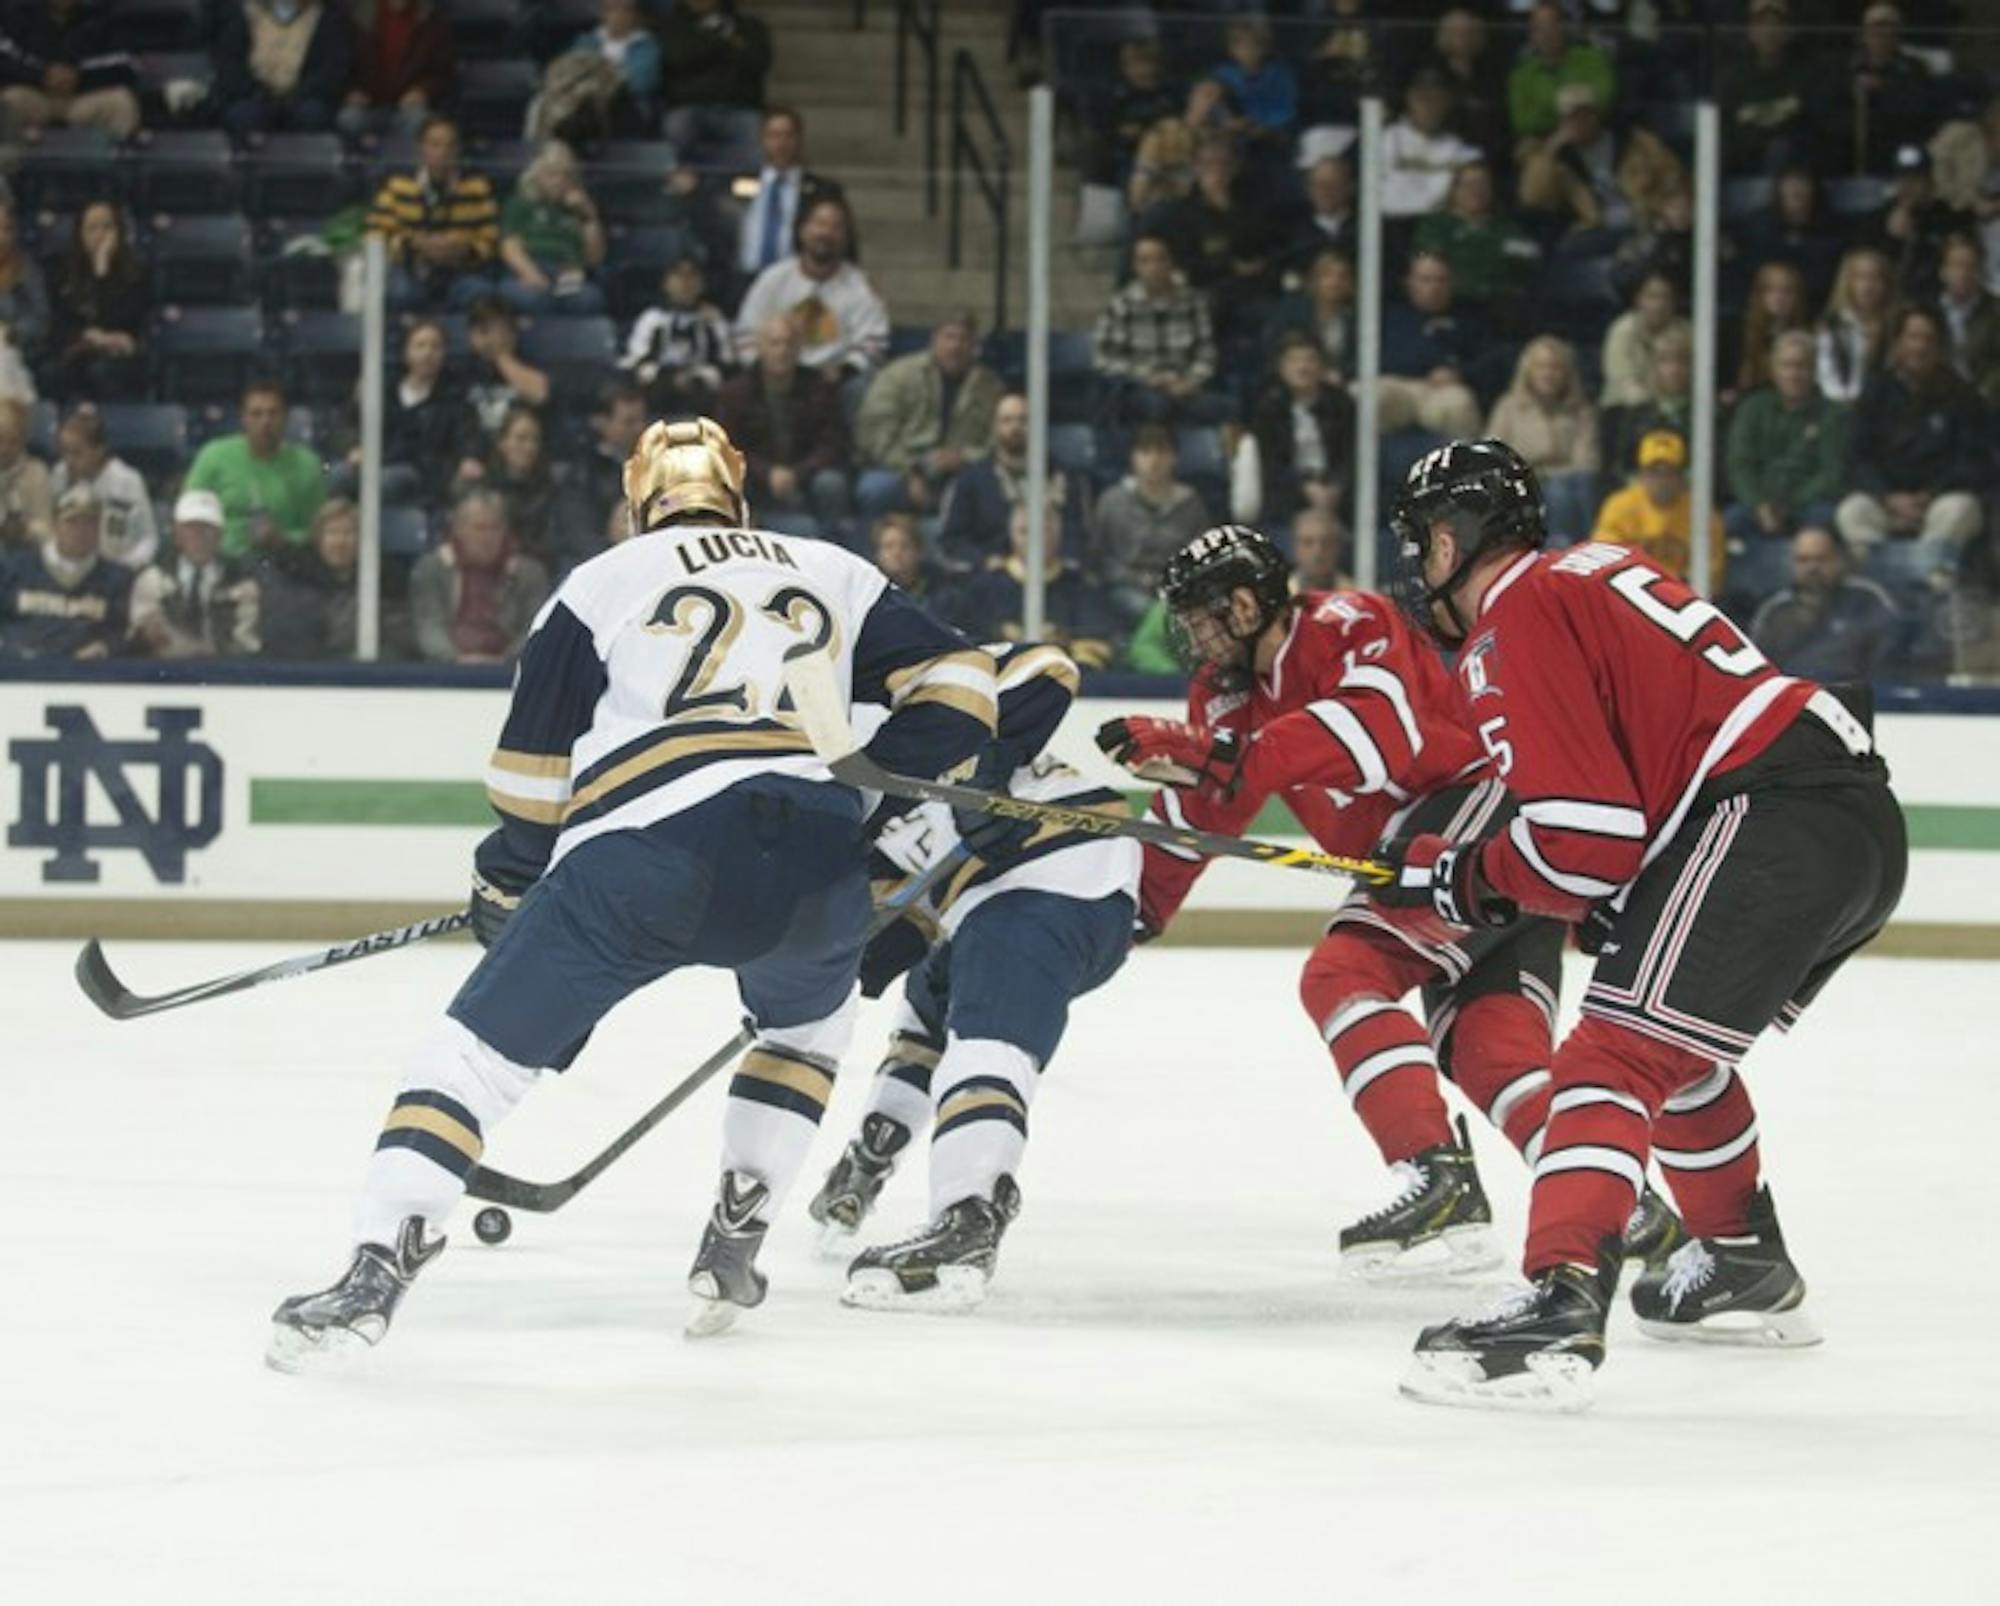 Irish junior left wing Mario Lucia tangles with defenders during Notre Dame’s 3-2 loss to Rensselaer on Oct. 10.